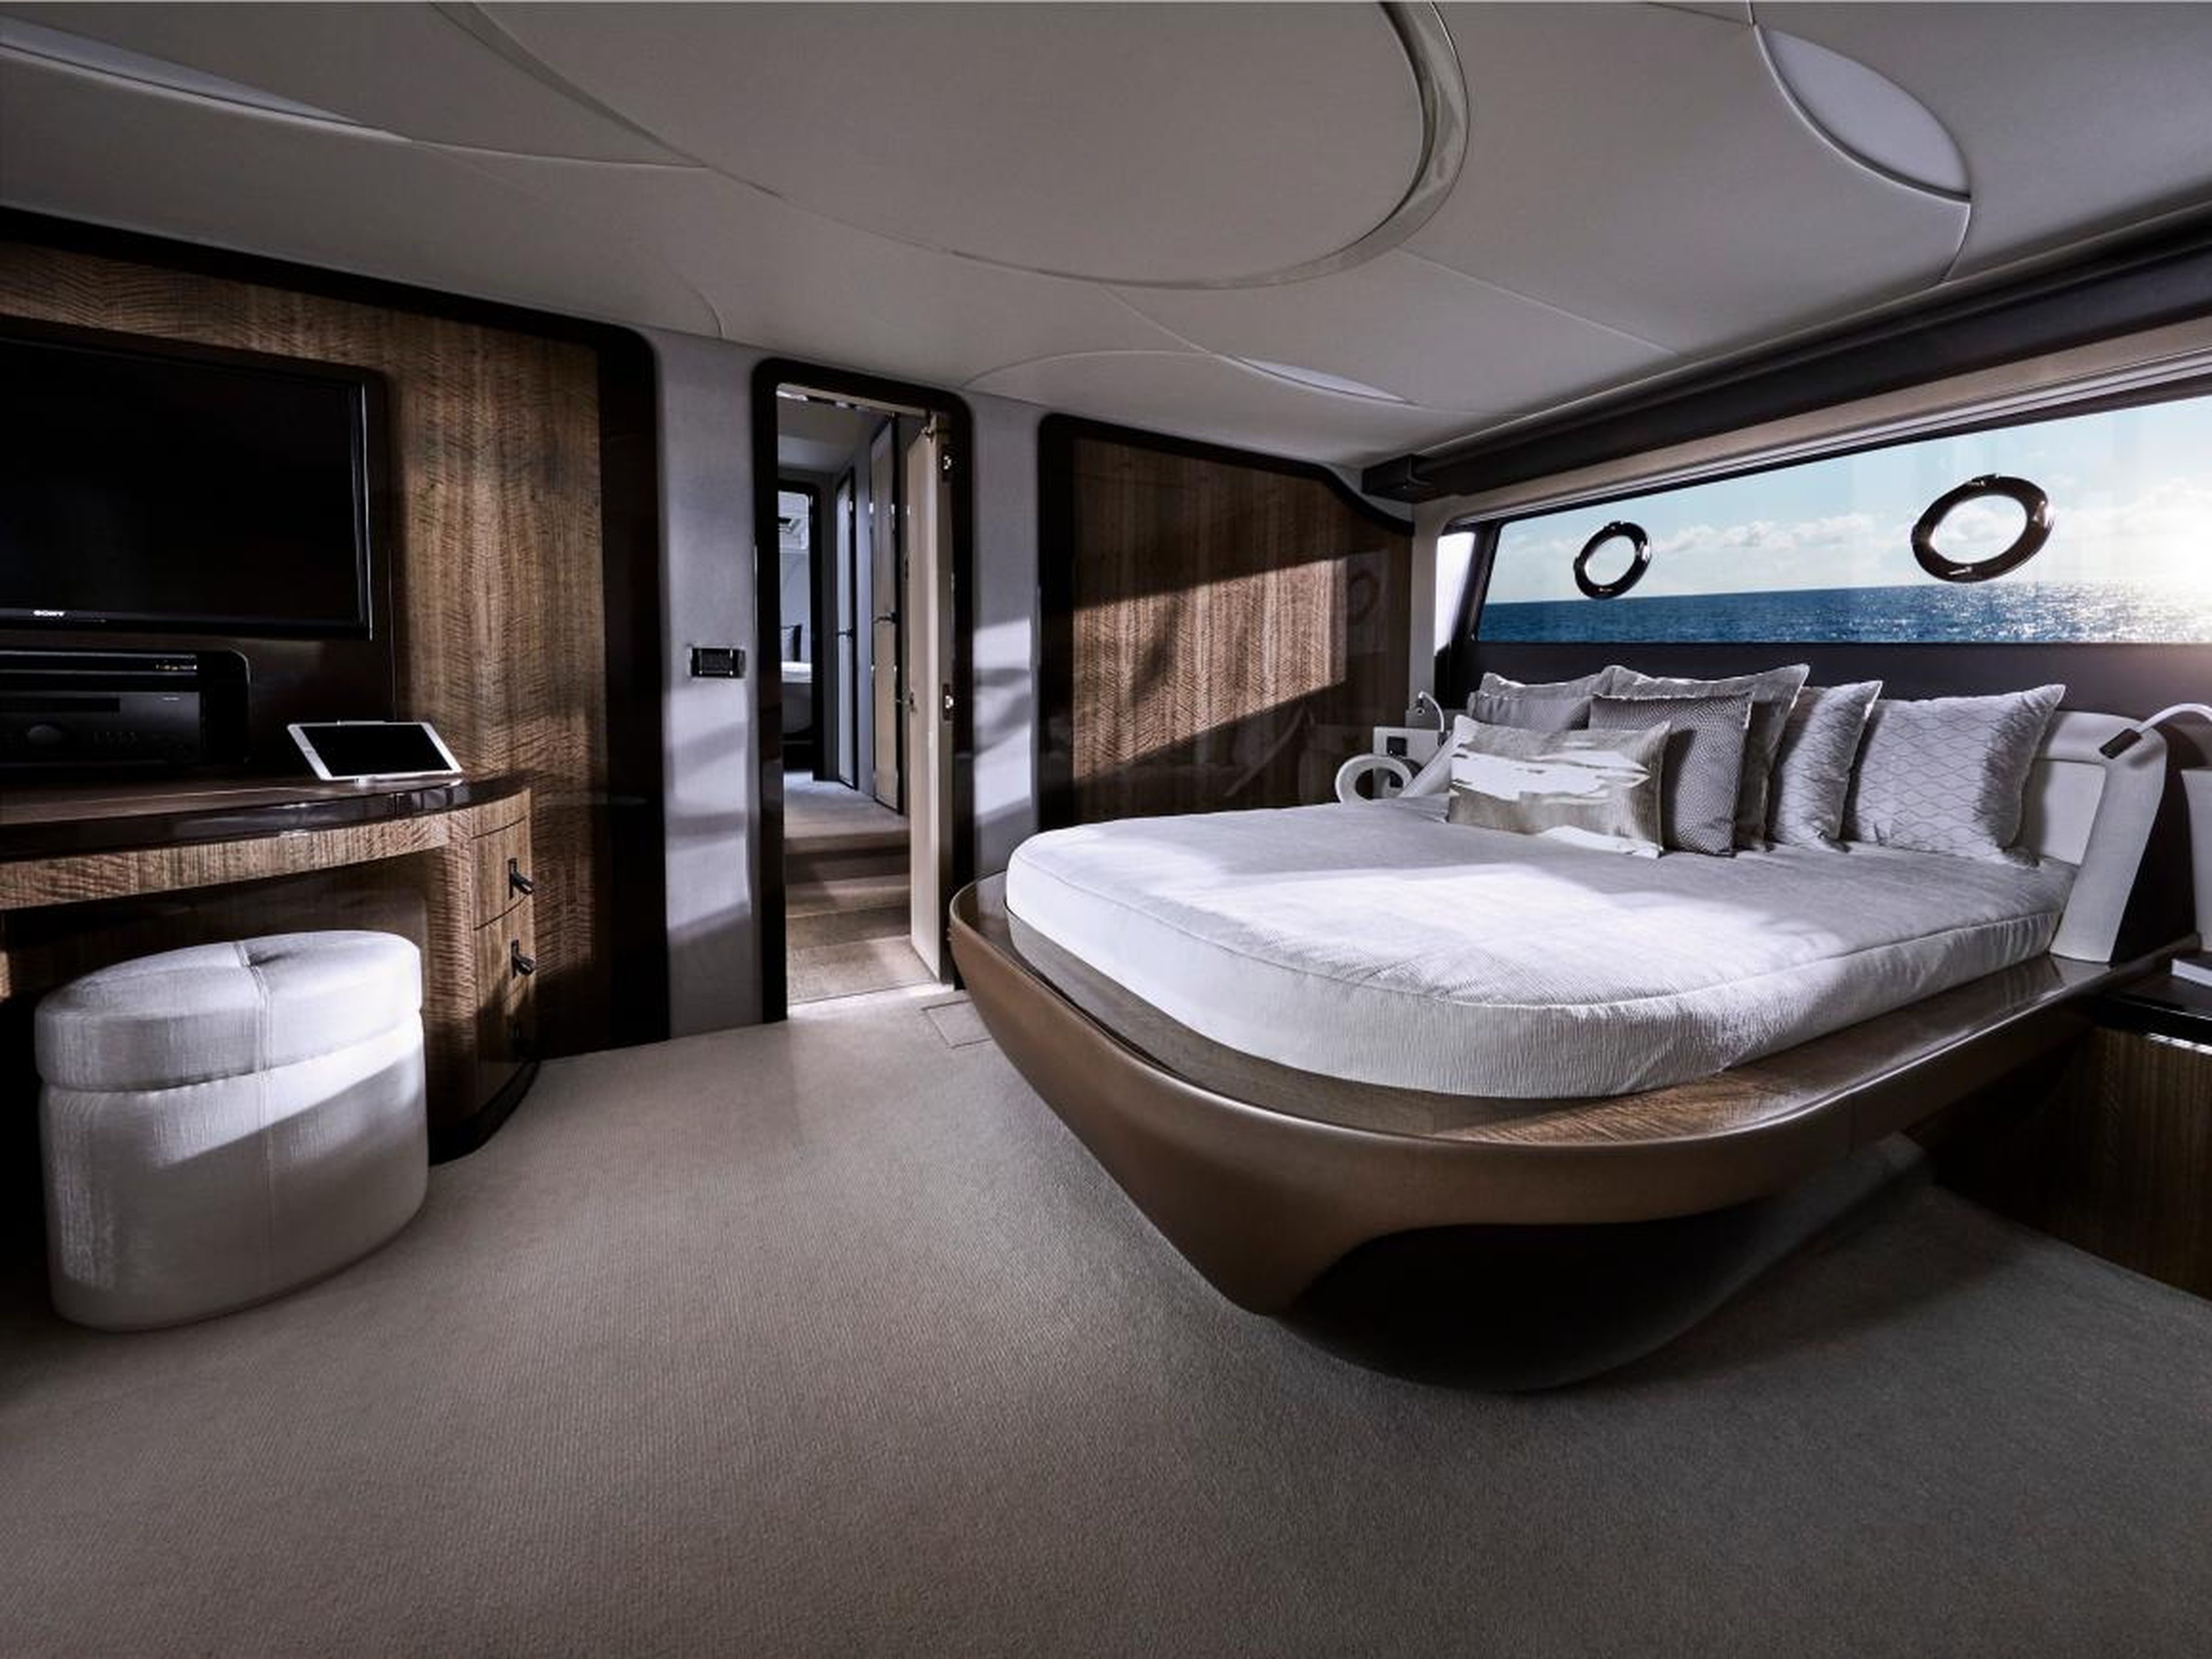 The LY 650 has three staterooms and can sleep a total of six people.